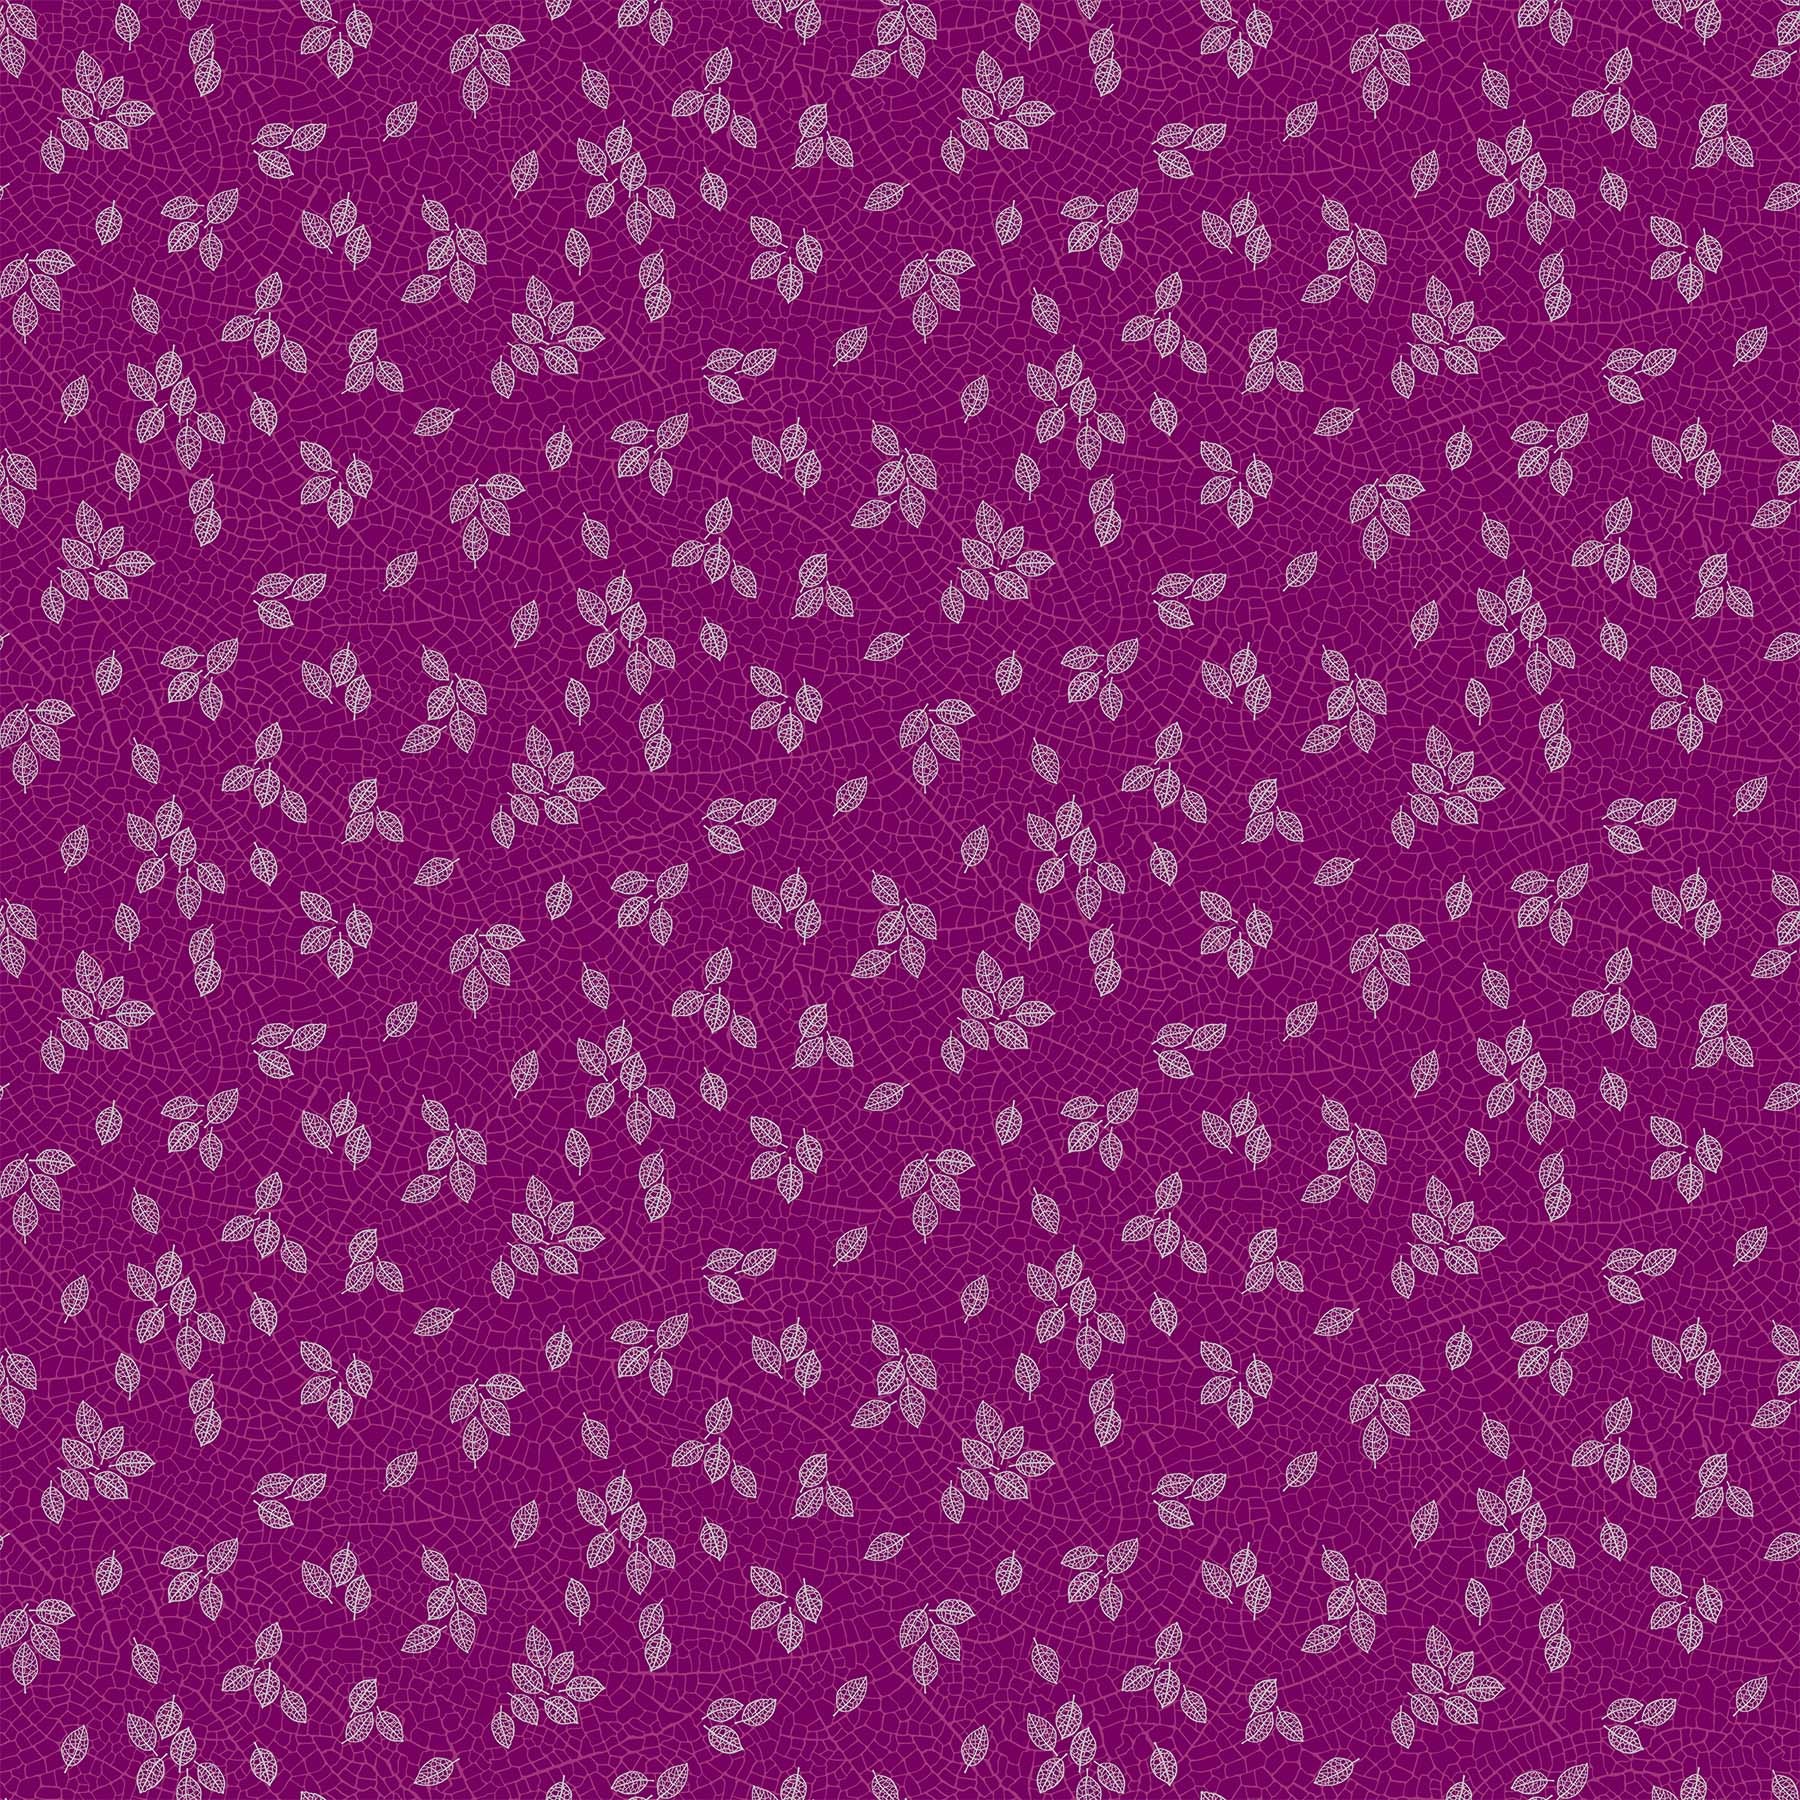 Fabric, Silhouette, Off Beat Tiny Leaves 2399086